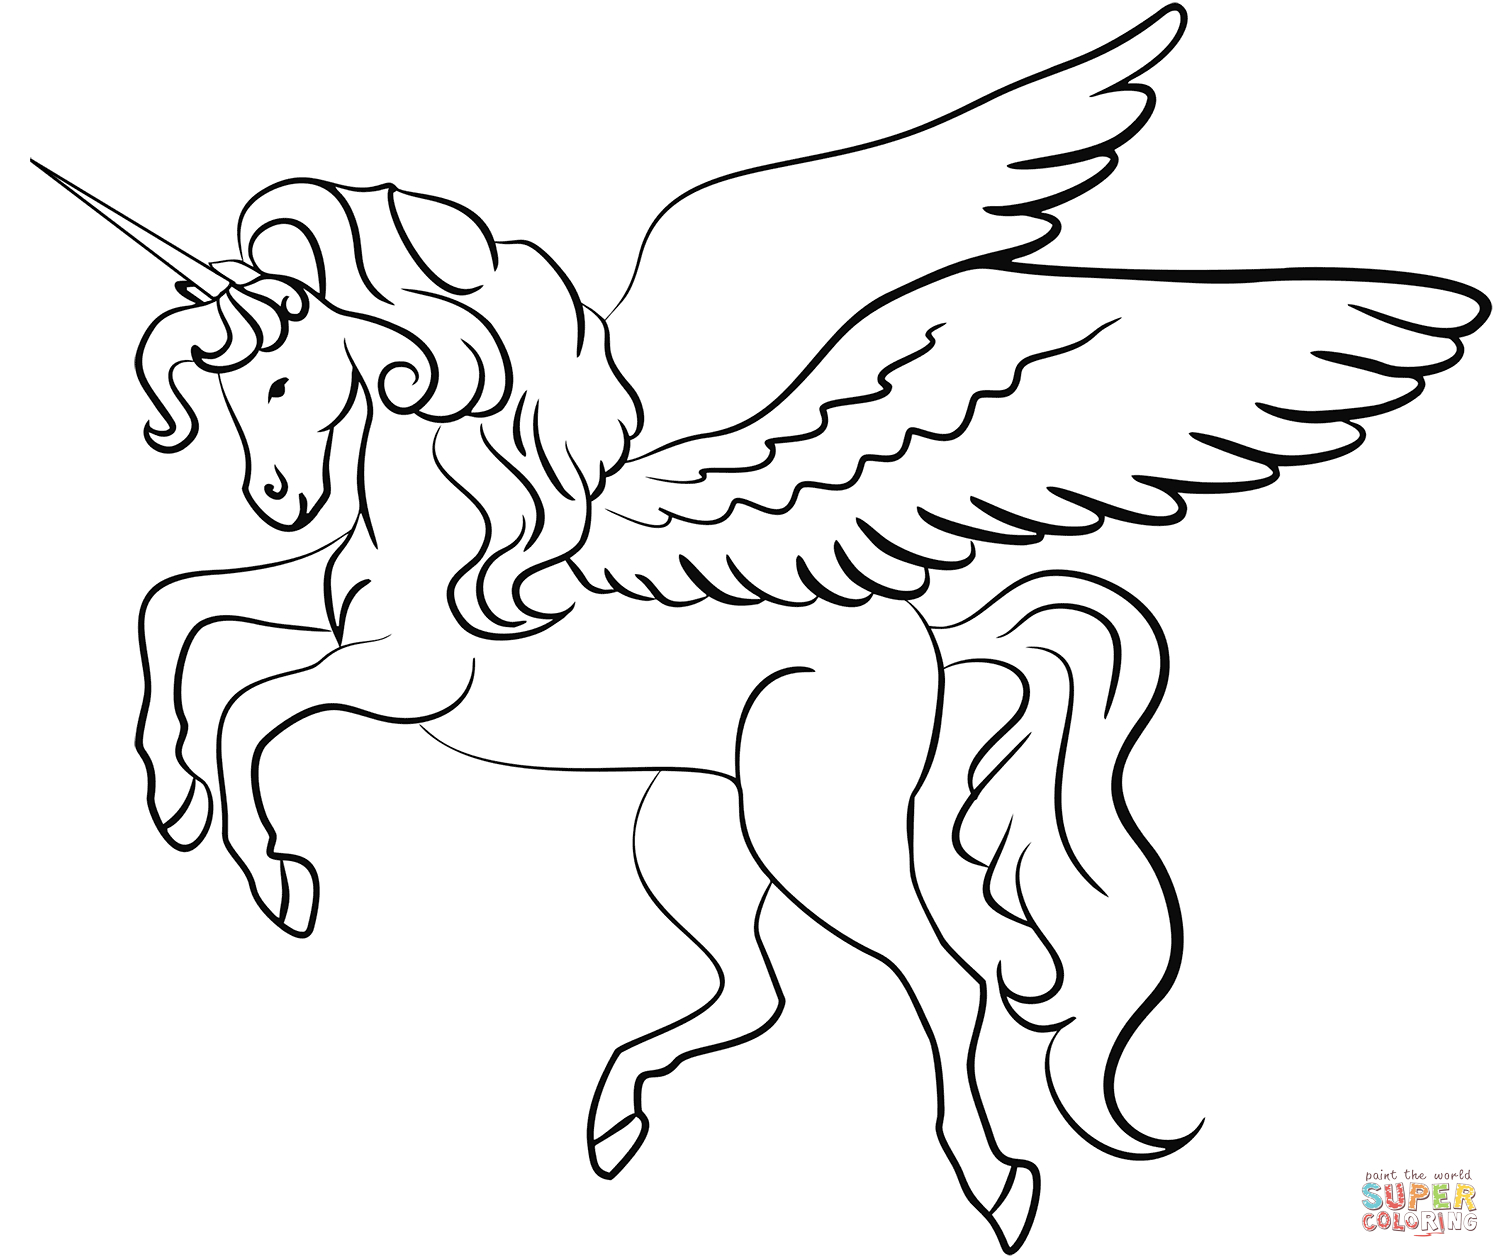 Winged Unicorn Coloring Page | Free Printable Coloring Pages tout Coloriage Unicorn